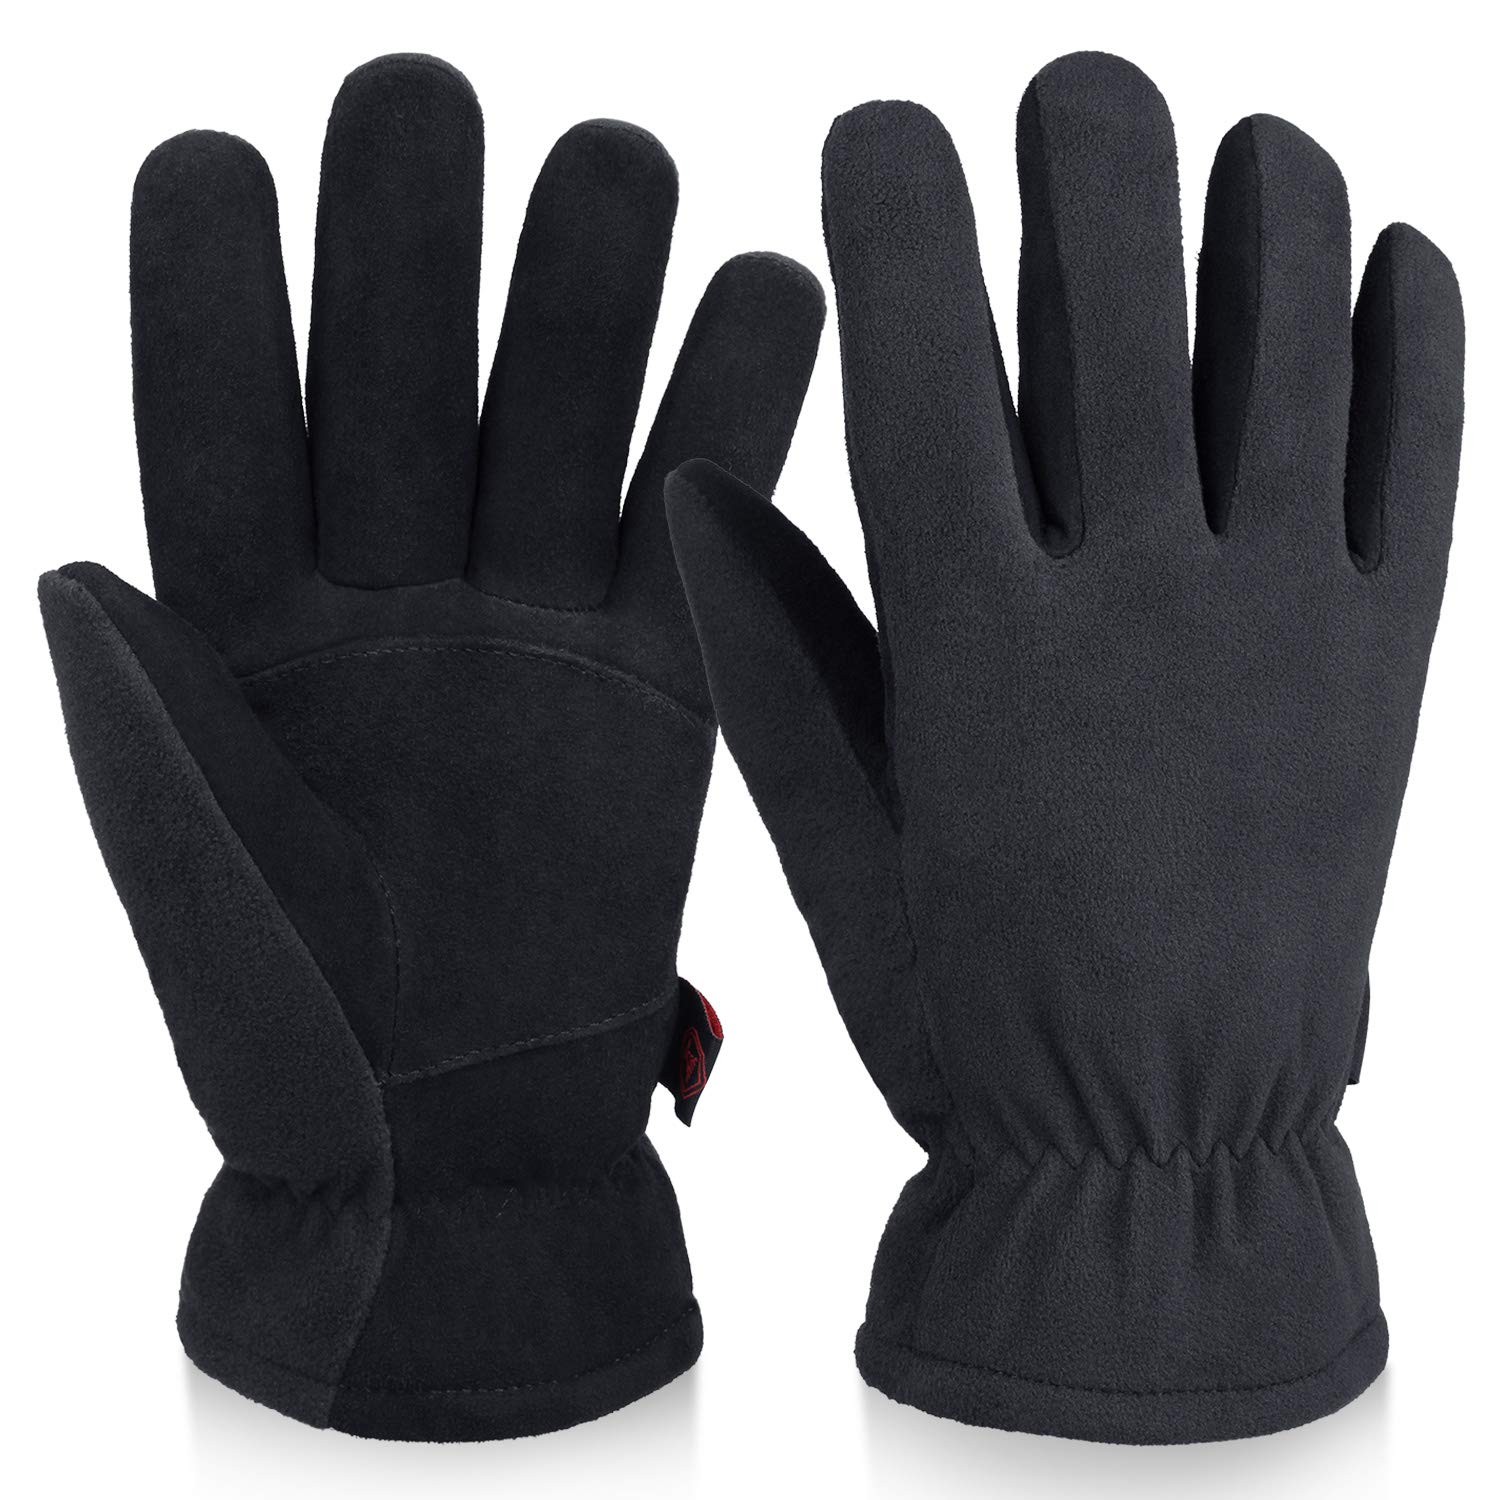 Book Cover OZERO Winter Work Gloves Deerskin Suede Leather Palm Gloves for Men Women Yard Work Shoveling Driving Cycling Cold Proof black Small